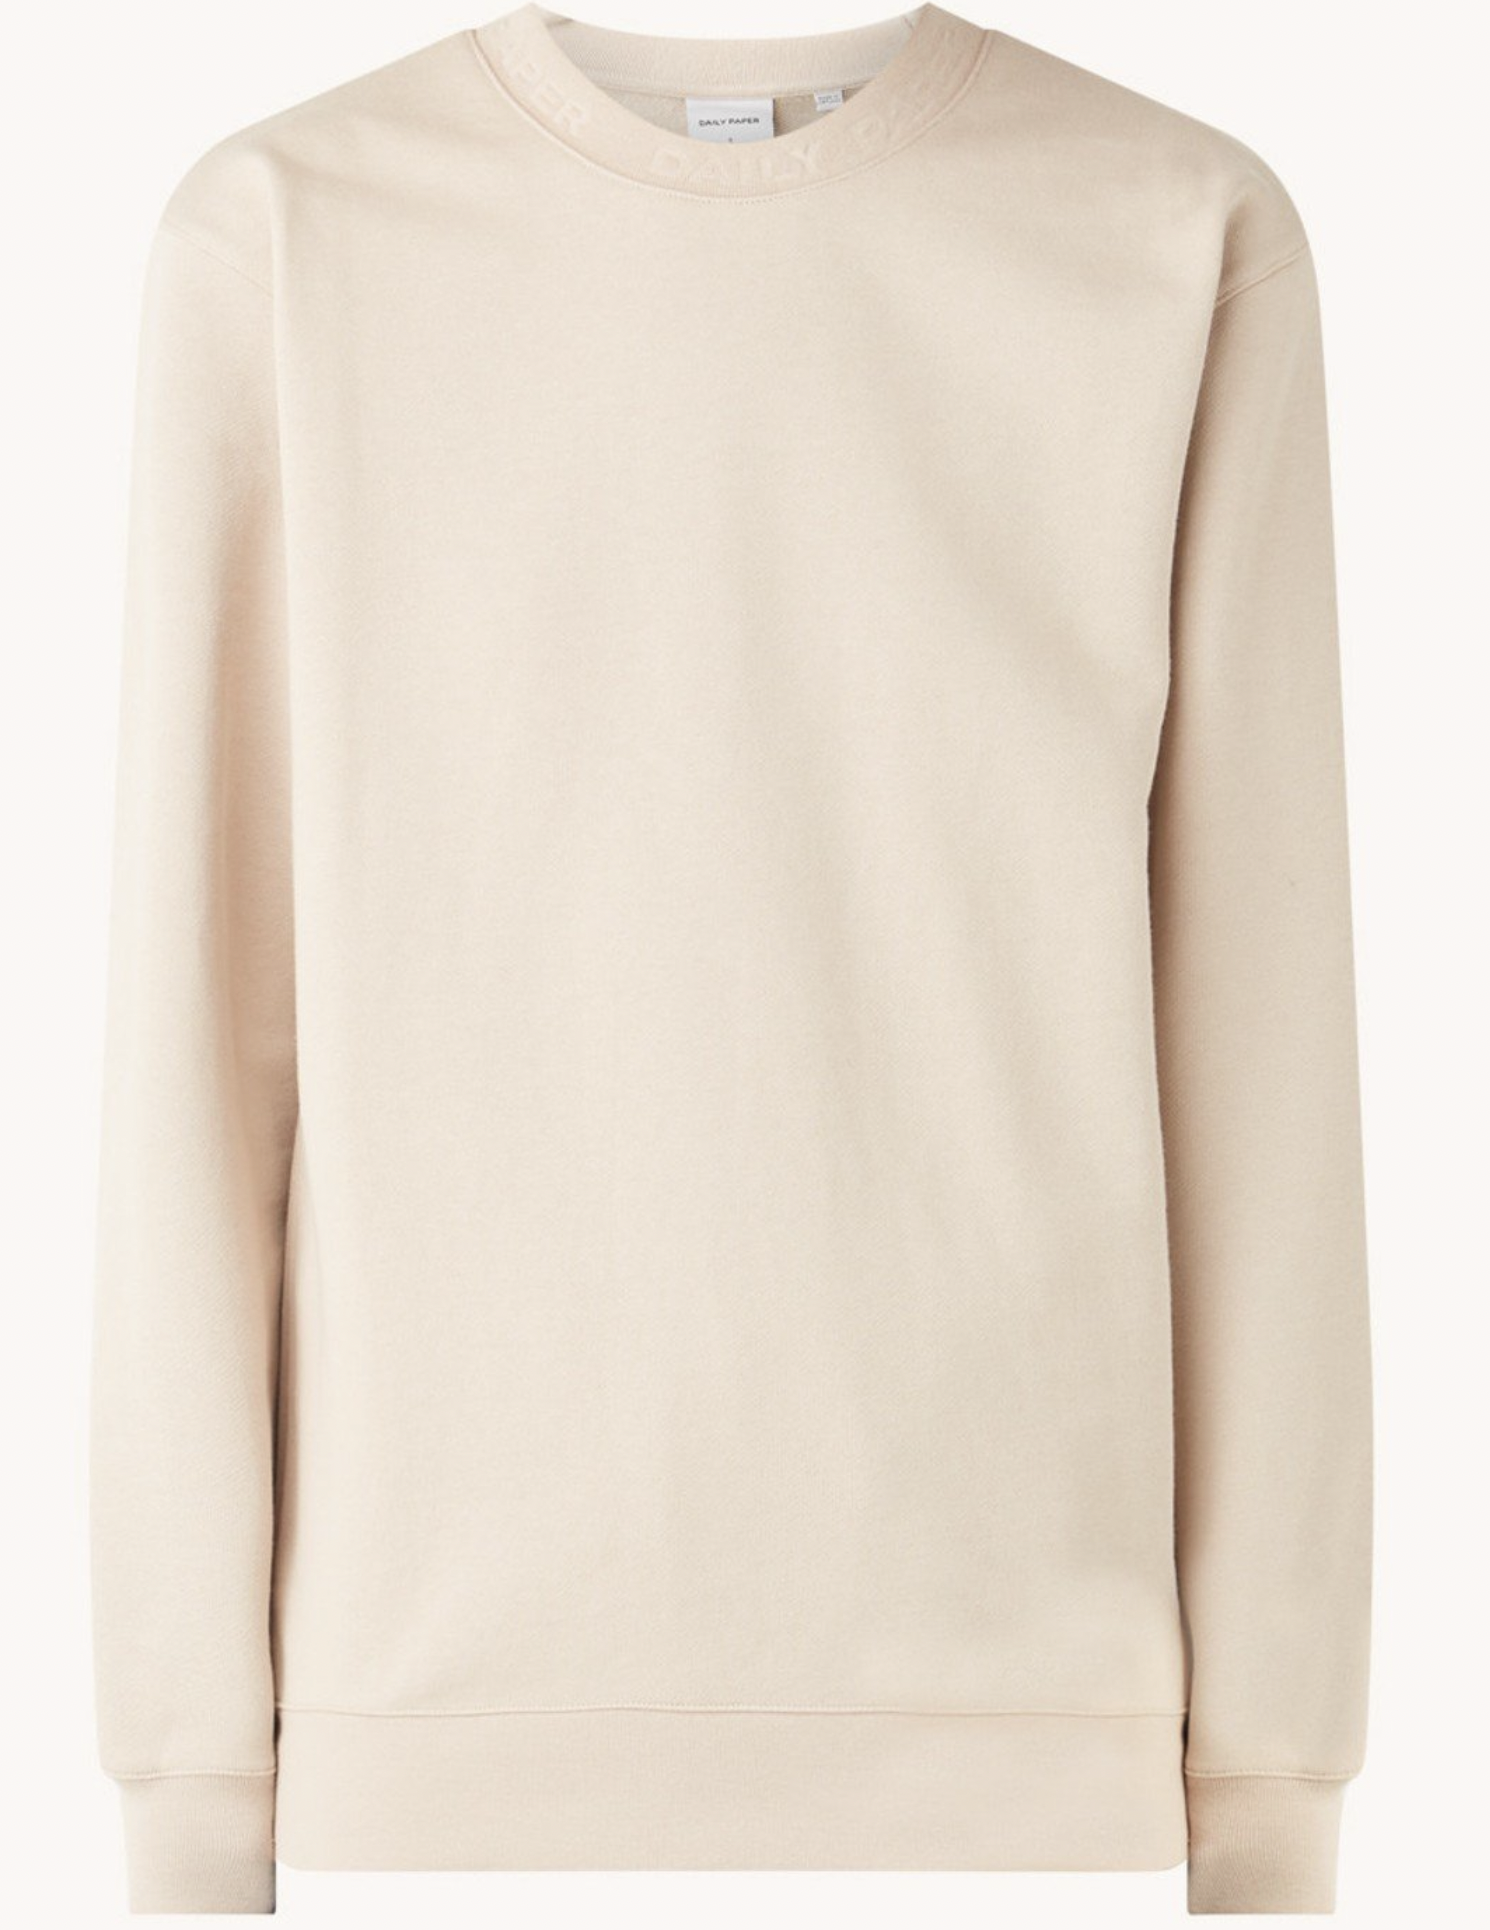 11 x the best sweaters and cardigans from the sale 